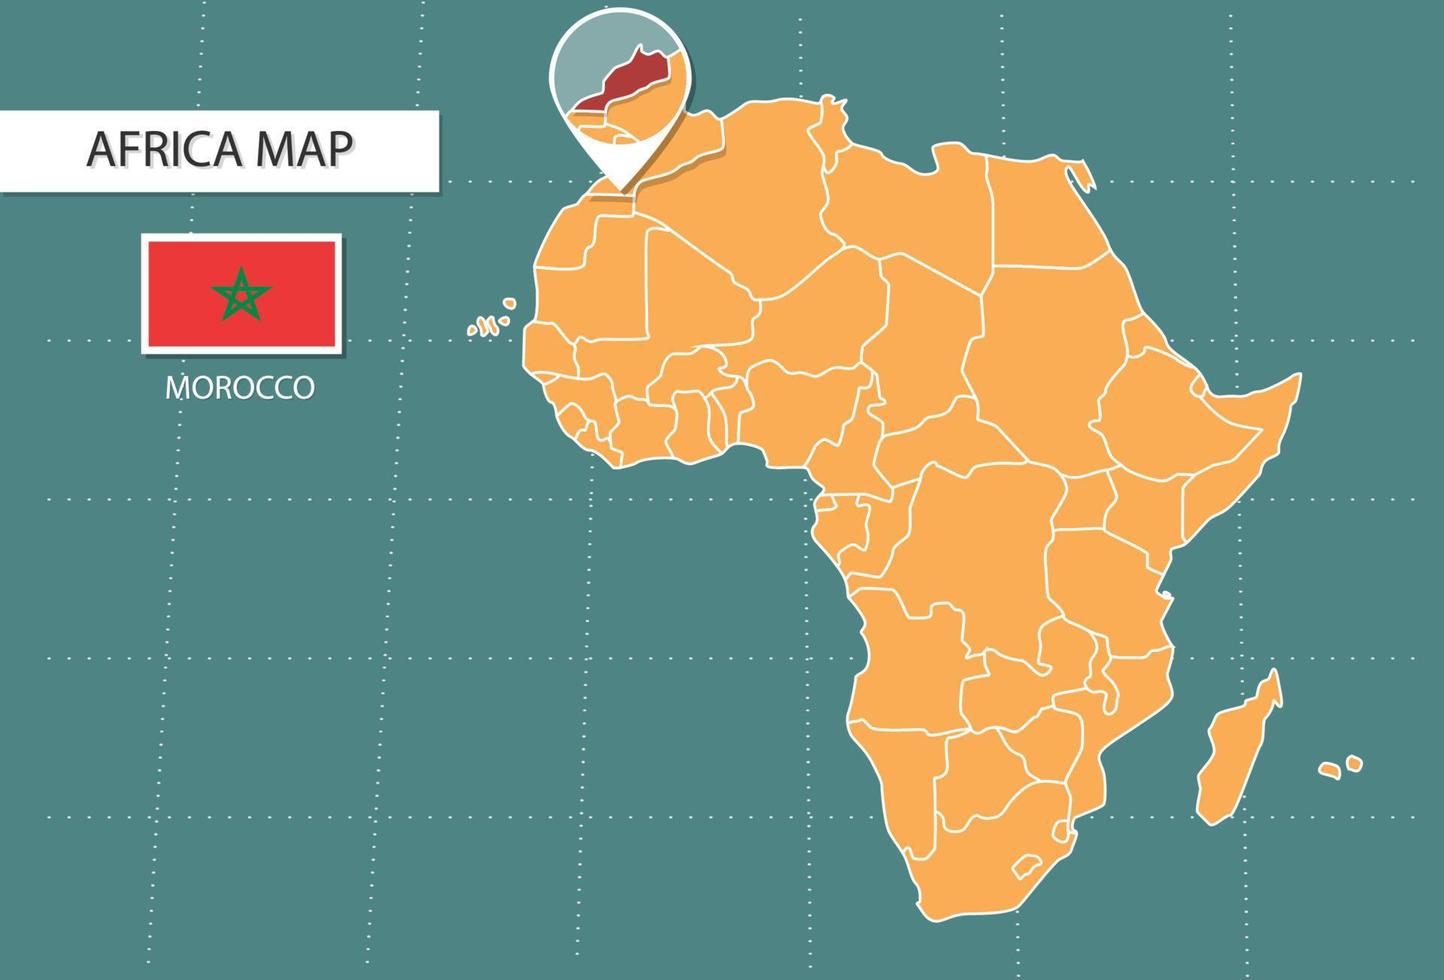 Morocco map in Africa zoom version, icons showing Morocco location and flags. vector